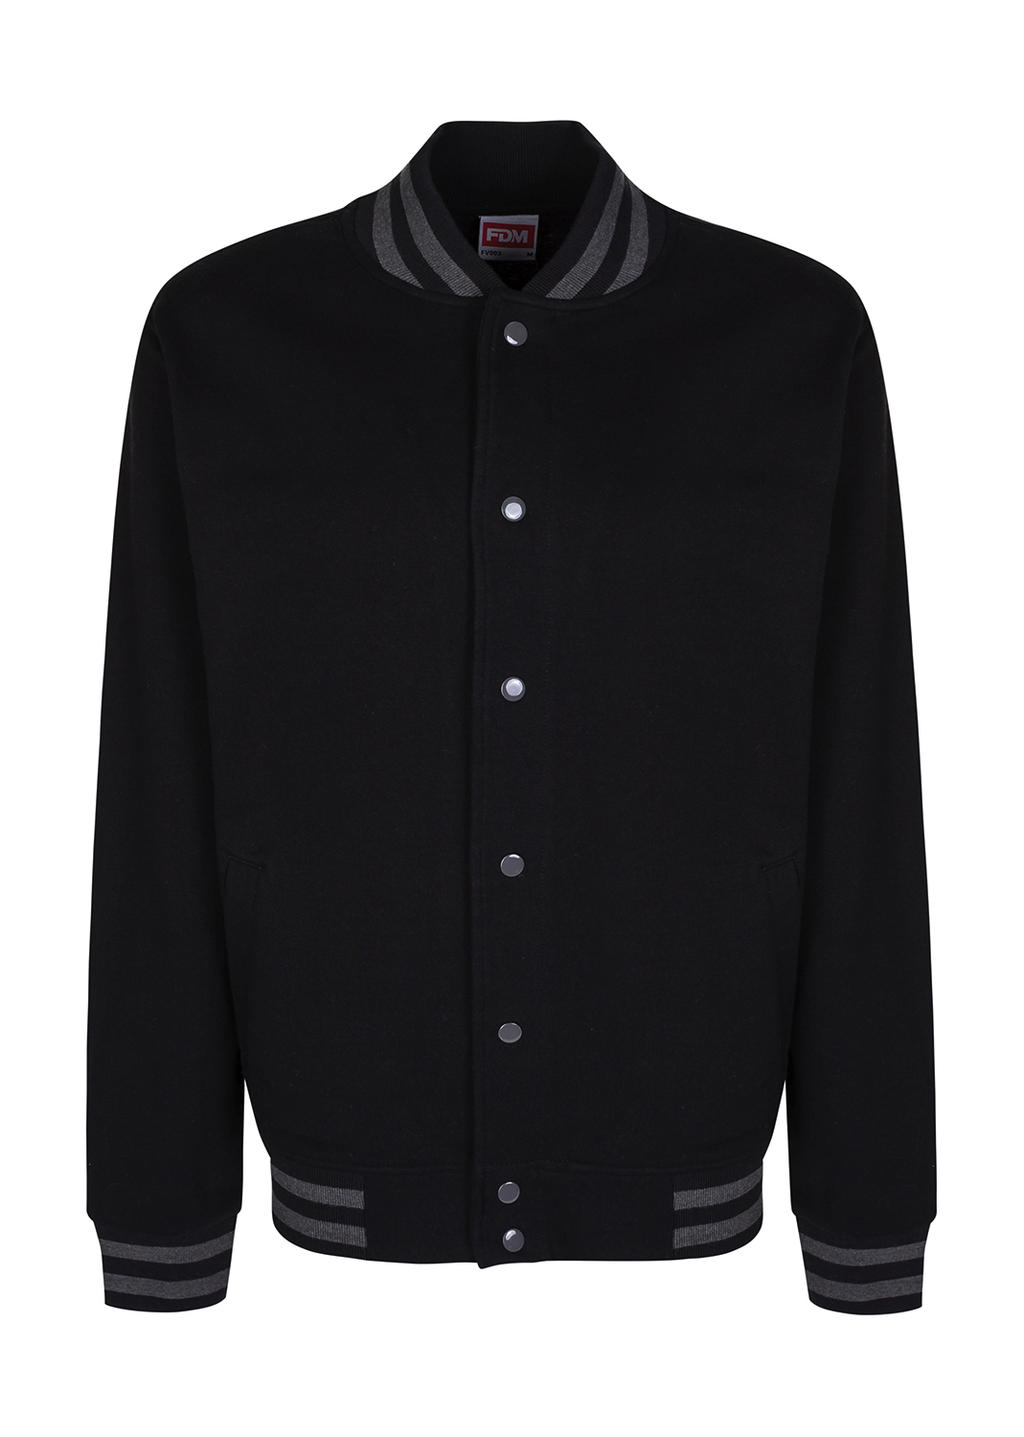  Campus Jacket in Farbe Black/Charcoal